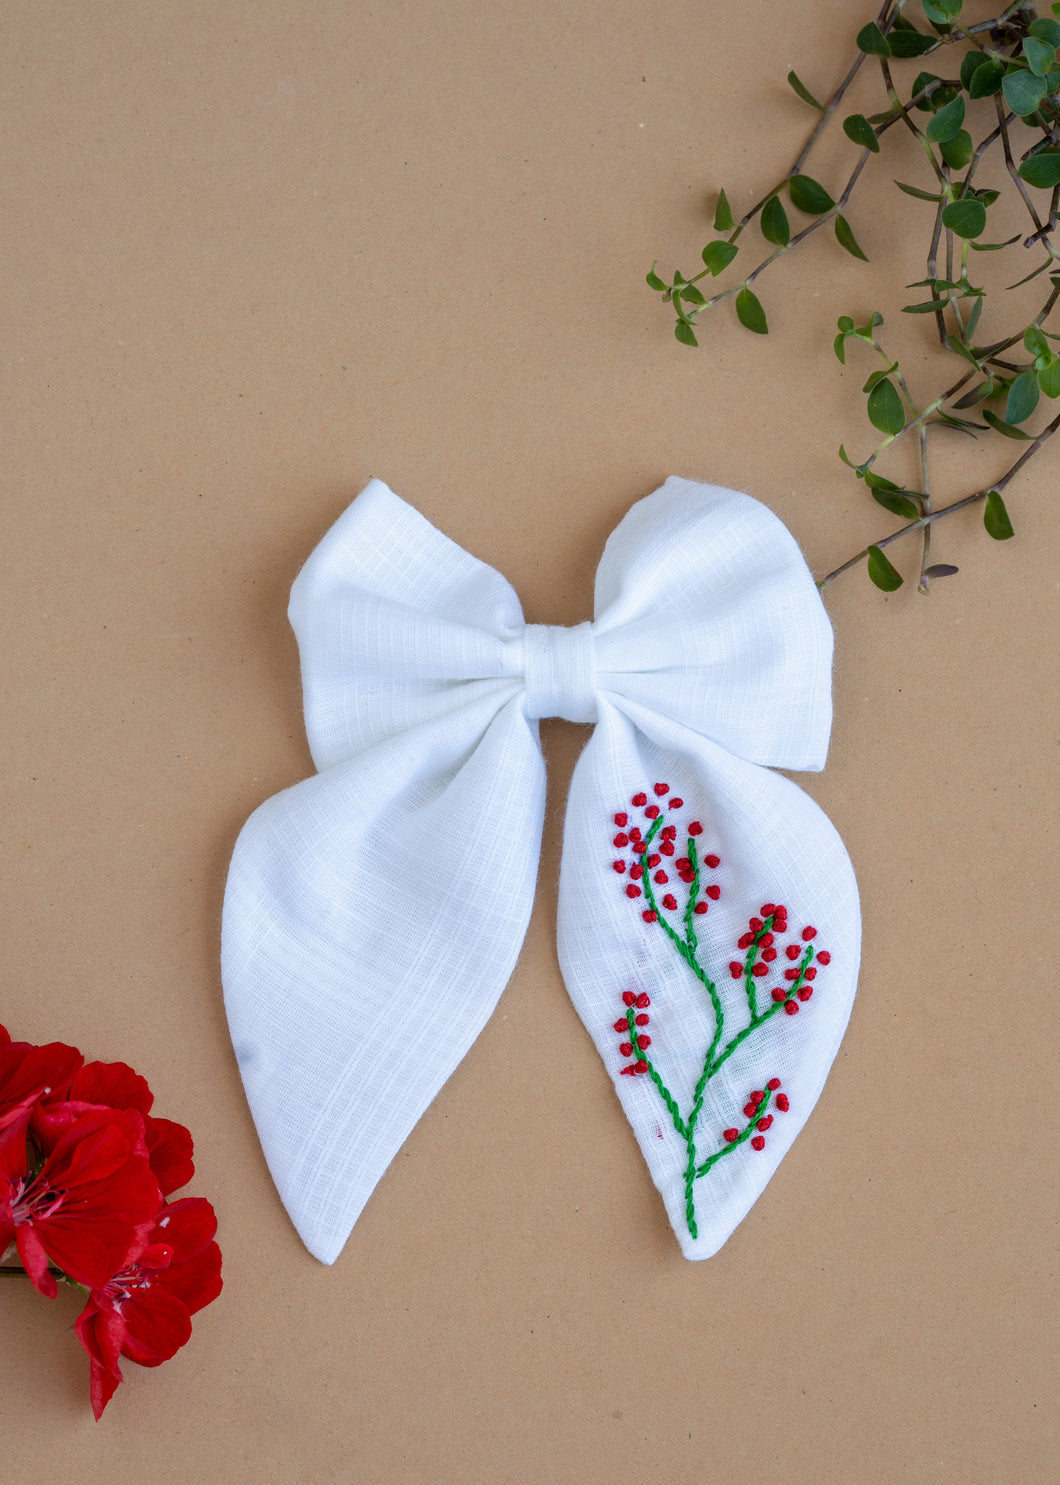 A Red Embroidered White Hairclip for kids hair accessories placed on a light brown background with flowers and leaves as decor